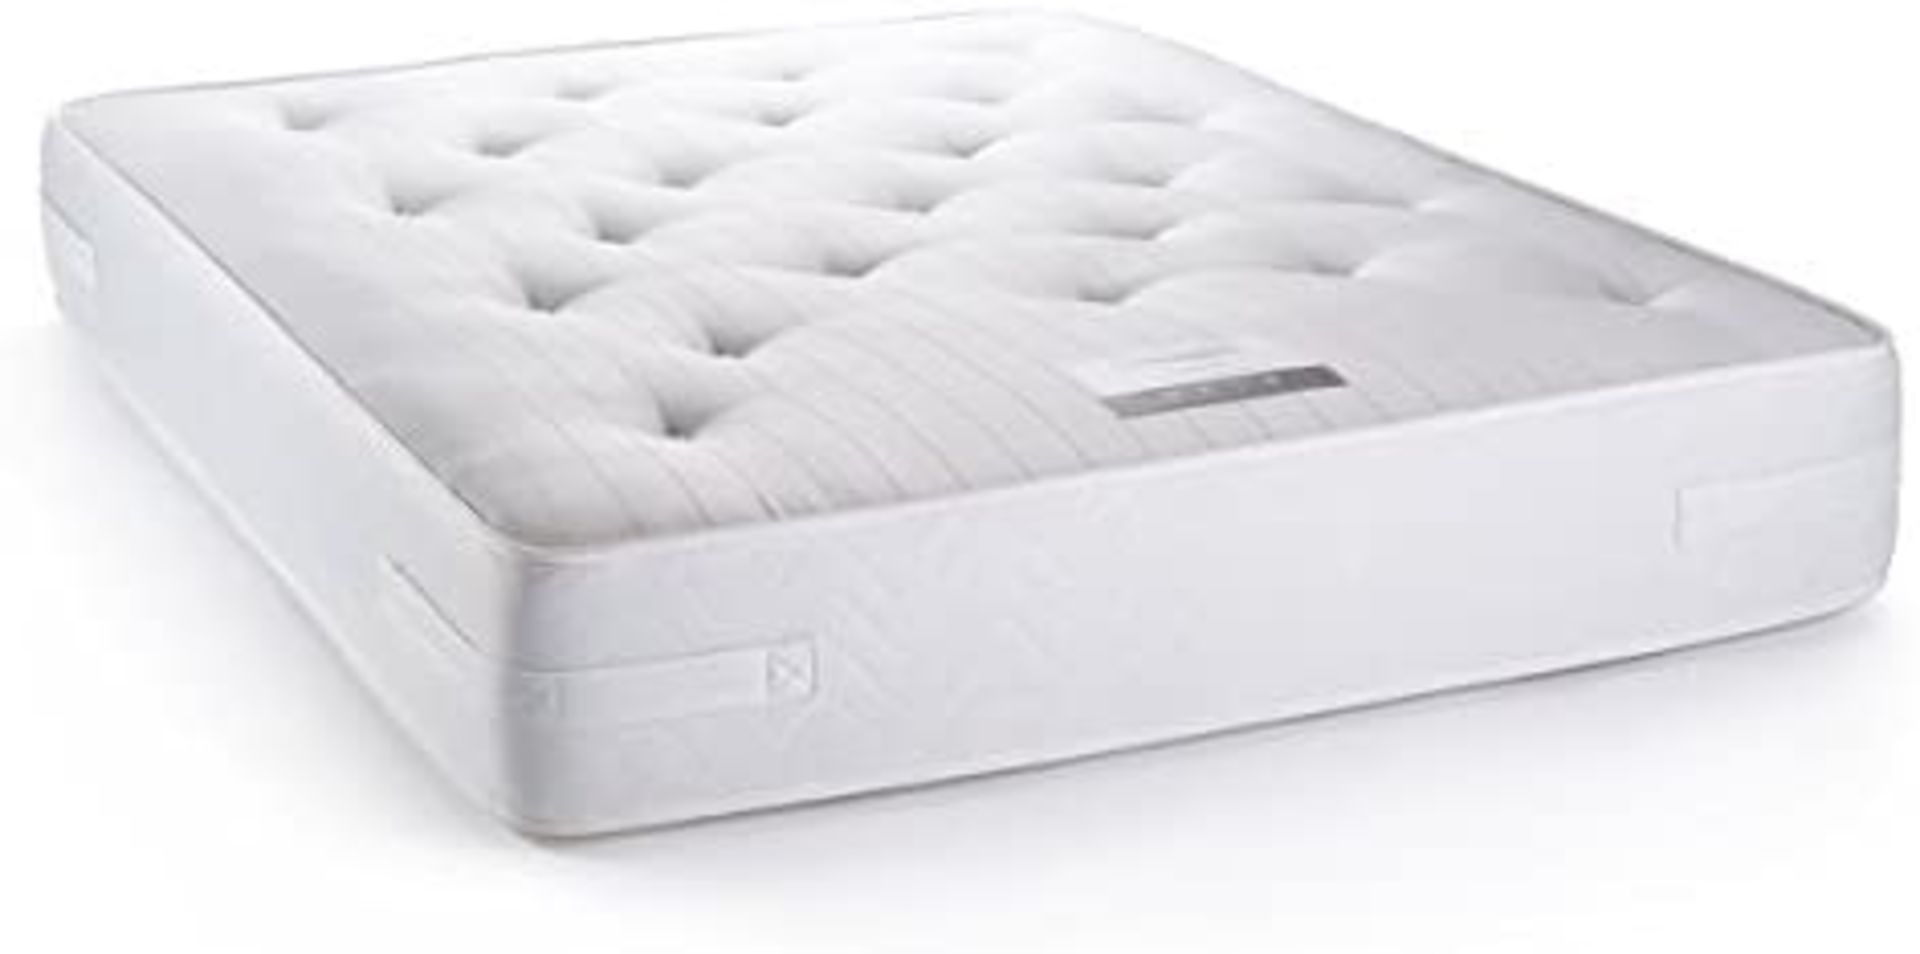 + VAT Brand New Fairford Cotton 1000 King Size Mattress - Provides Excellent Orthopaedic Support -